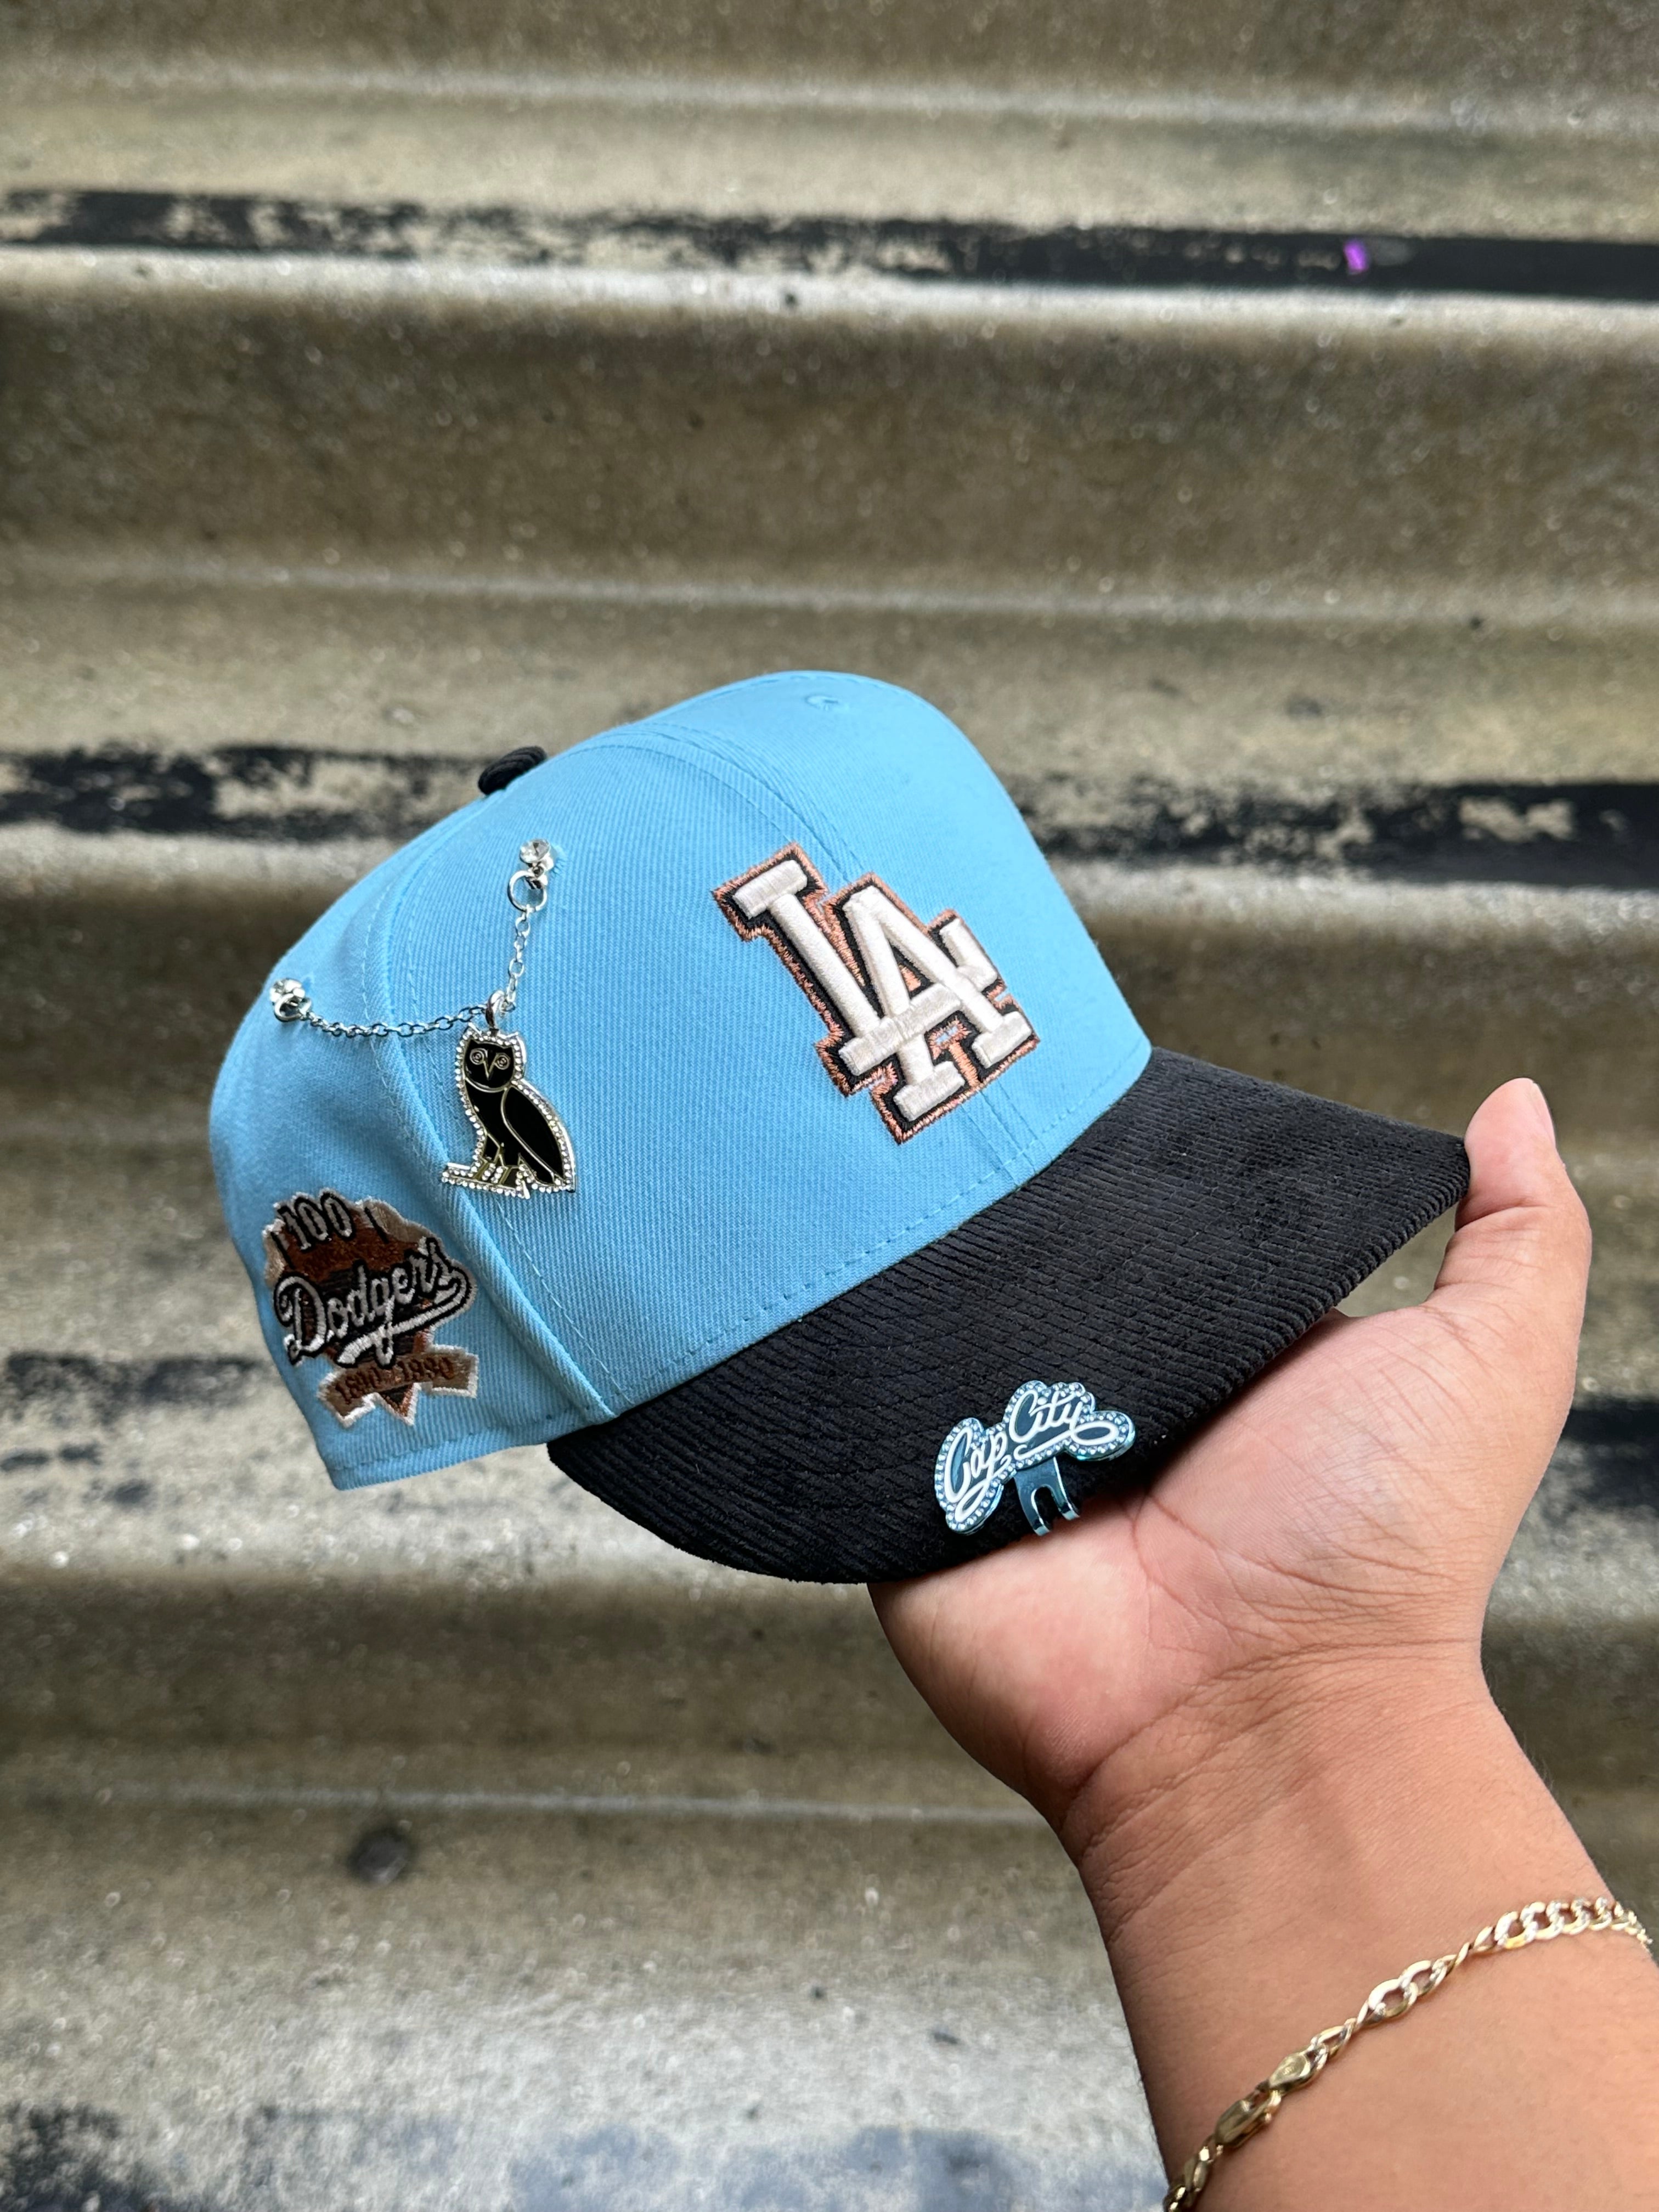 NEW ERA EXCLUSIVE 9FIFTY SKY BLUE/CORDUROY LOS ANGELES DODGERS SNAPBACK W/ 100TH ANNIVERSARY PATCH